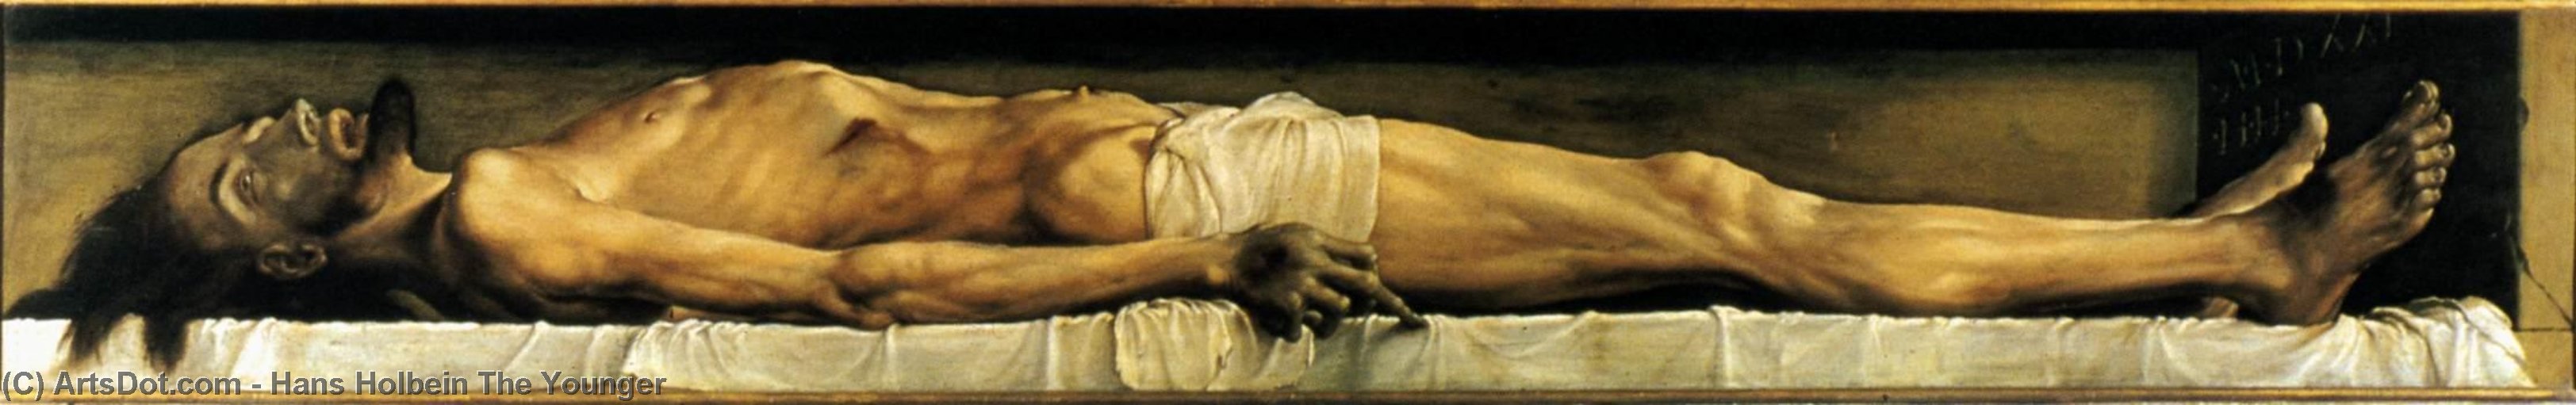 WikiOO.org - 백과 사전 - 회화, 삽화 Hans Holbein The Younger - The Body of the Dead Christ in the Tomb